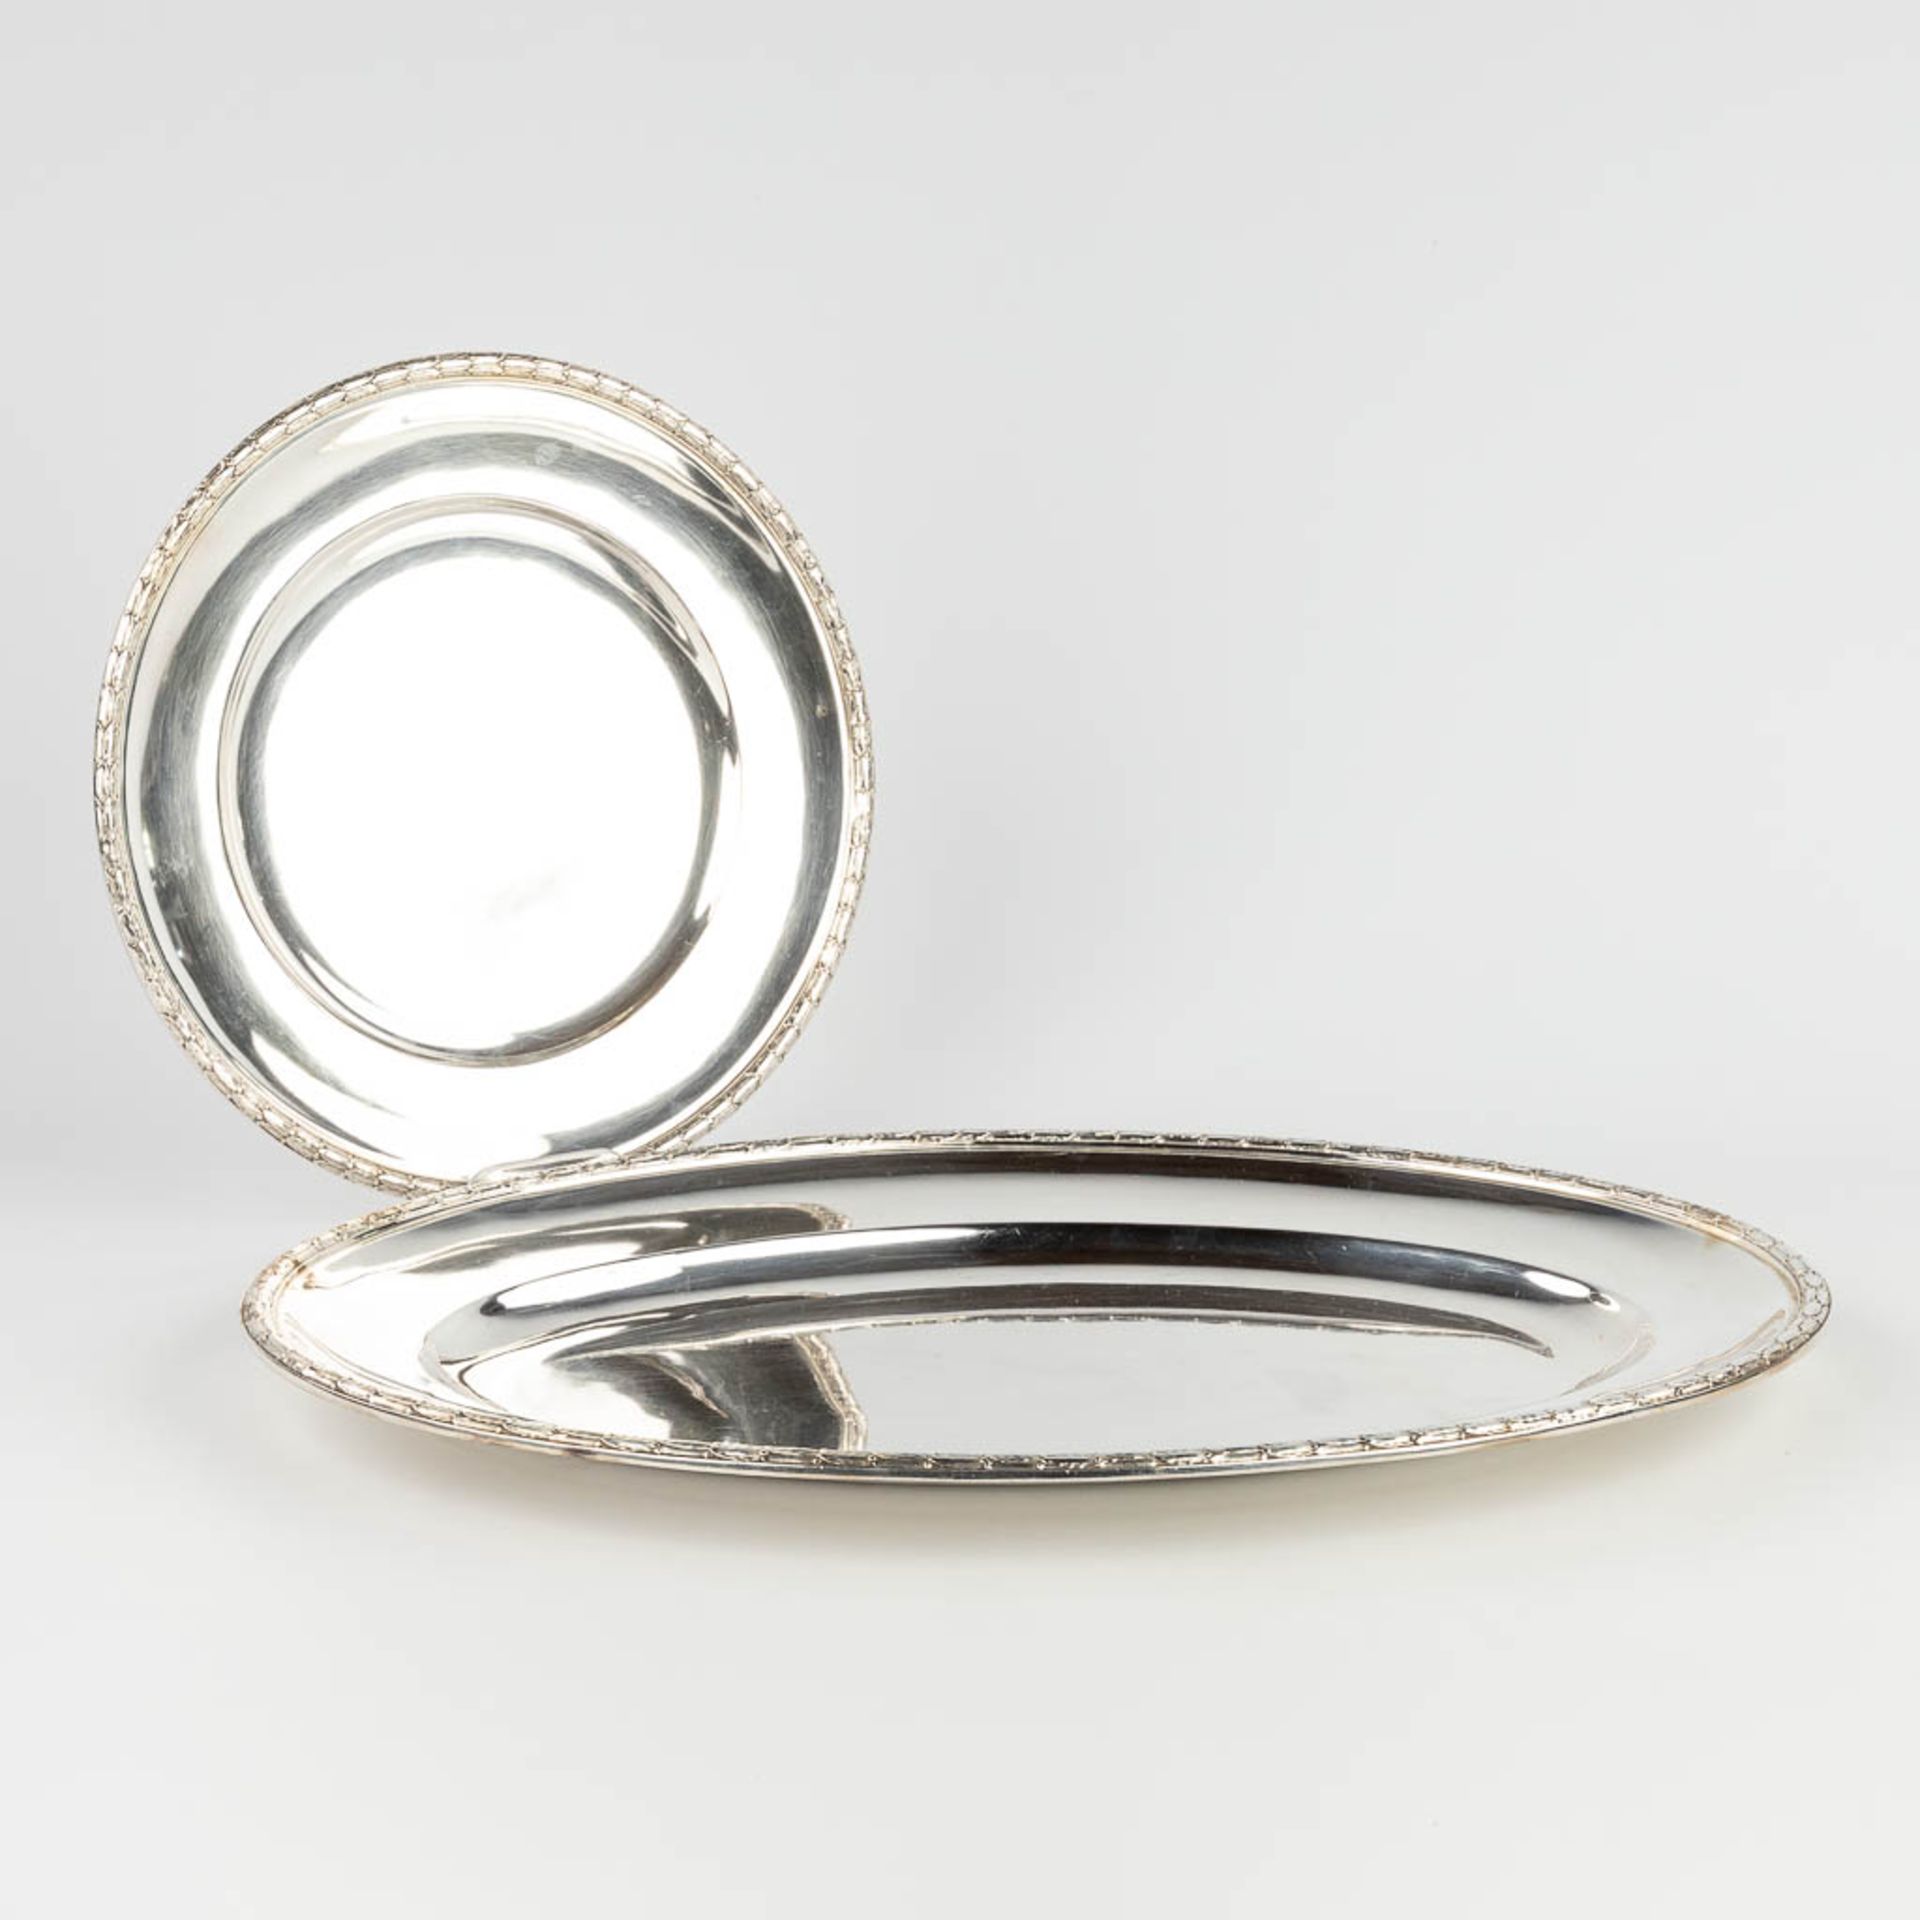 CAMA, a collection of 2 silver-plated serving plates. (L: 49 x W: 32,5 cm)